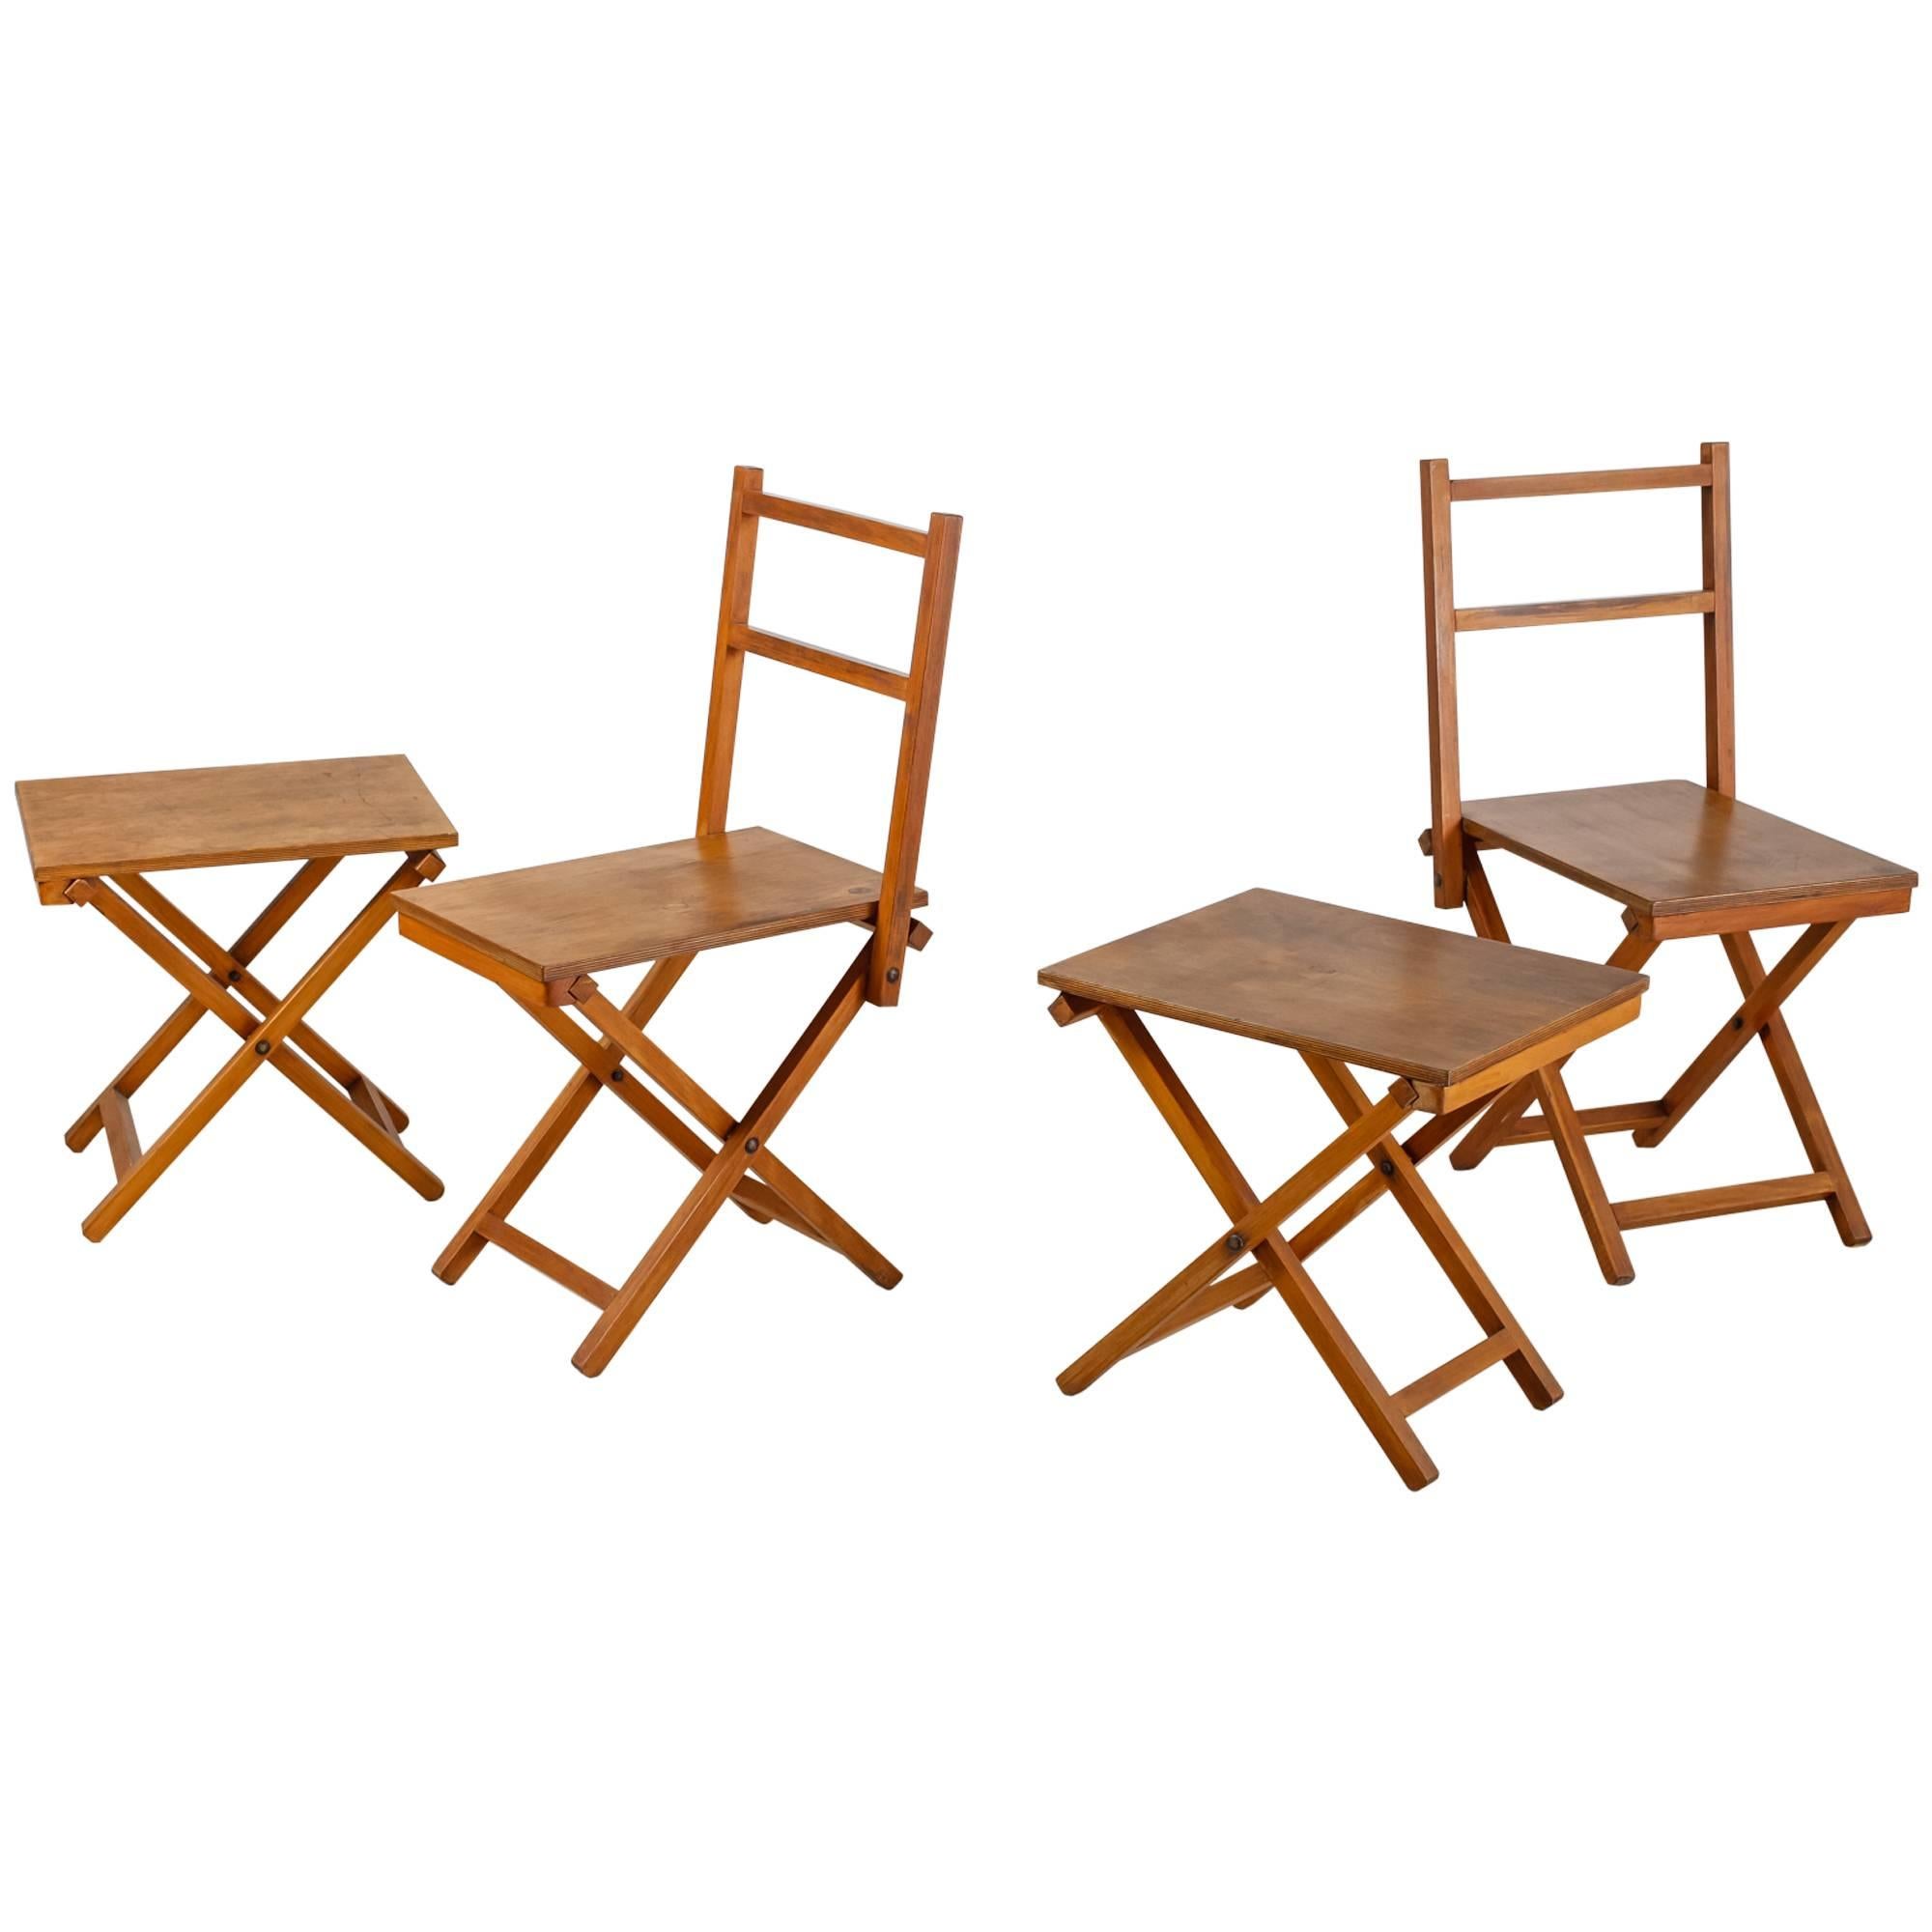 Set of Two Wooden Folding Chairs and Two Stools, Dutch, 1950s